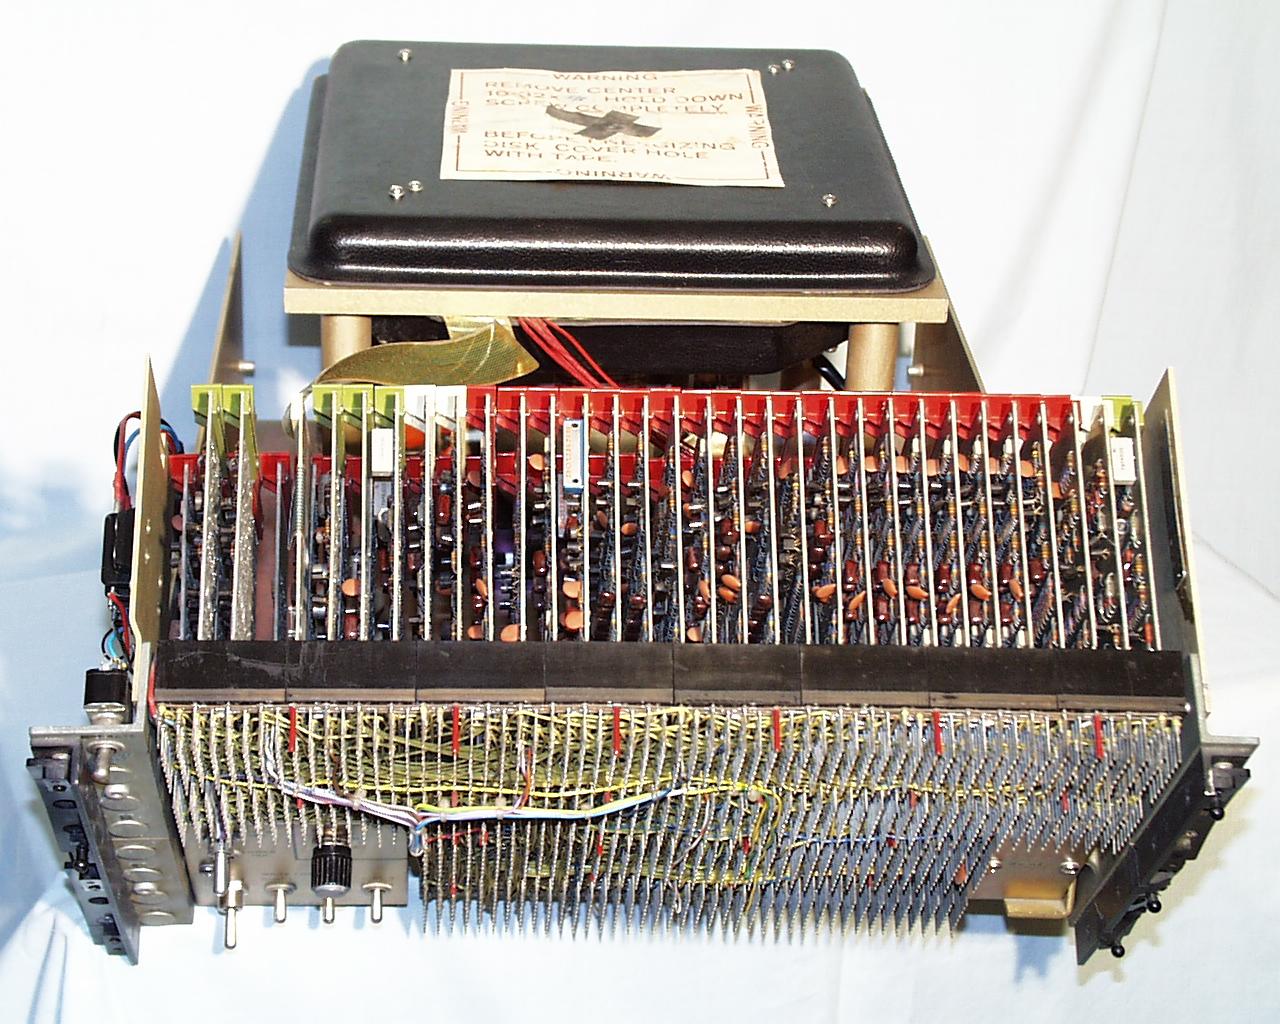 PDP-8 DF32 Disk Drive Top view of cards